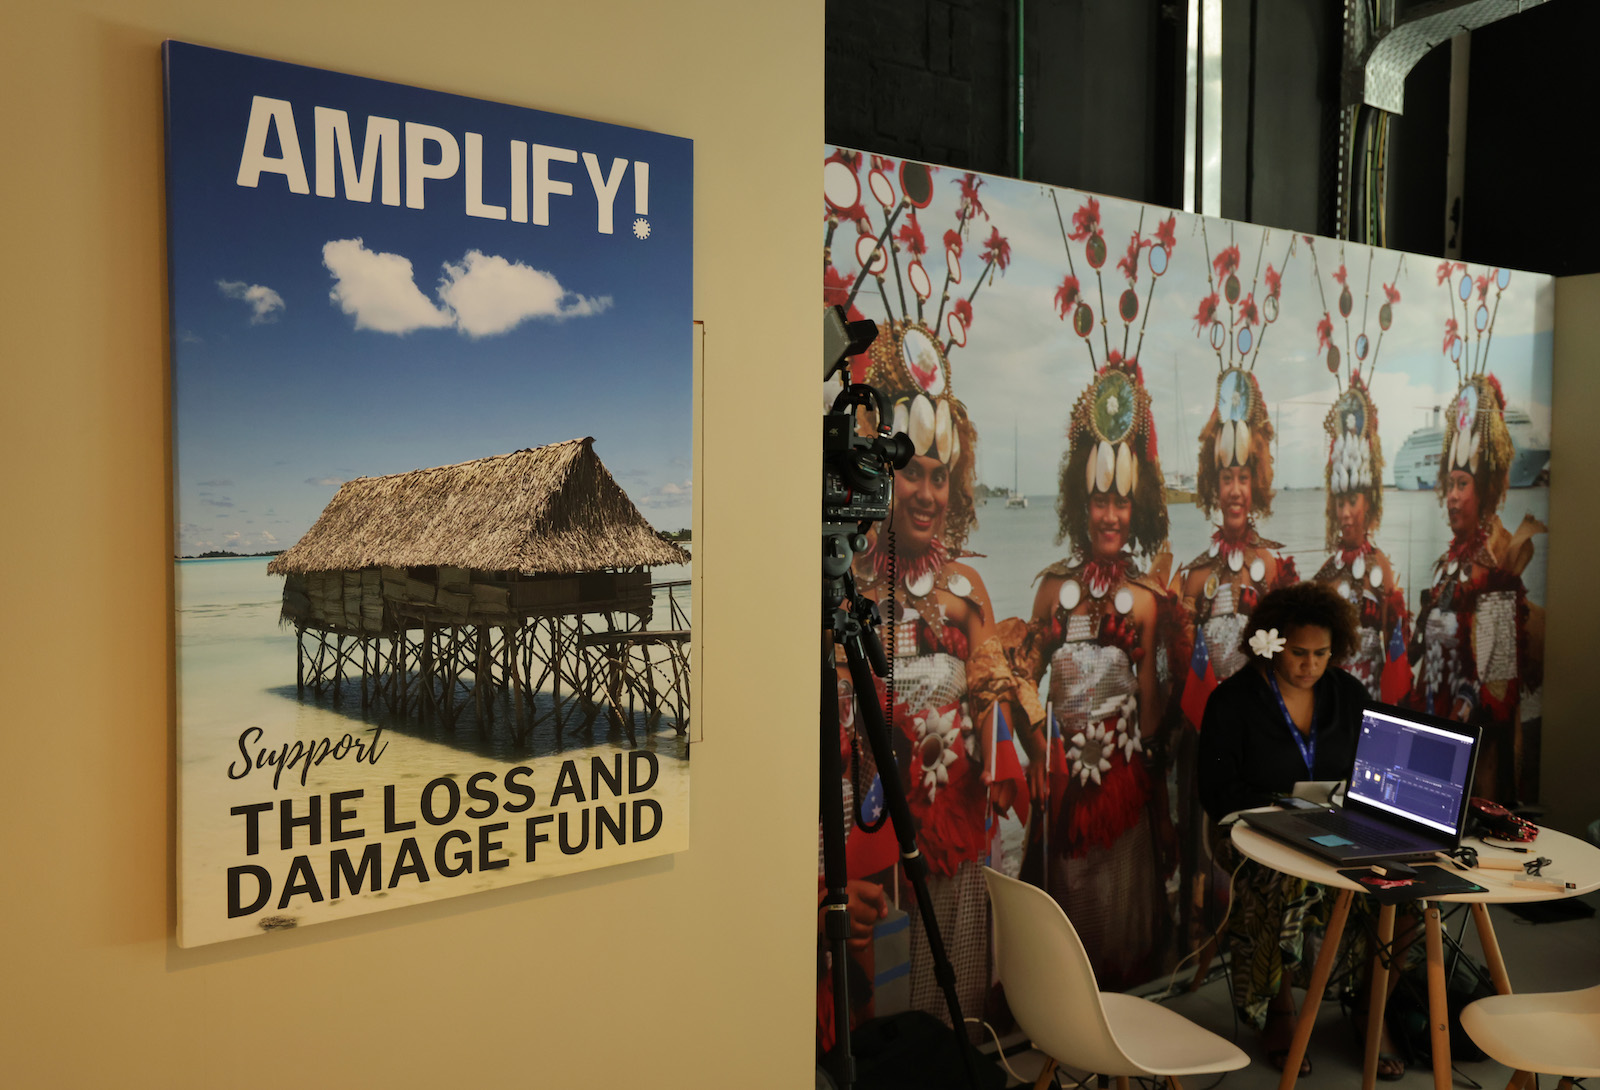 a poster with a house near the ocean says amplify support the loss and damage fund